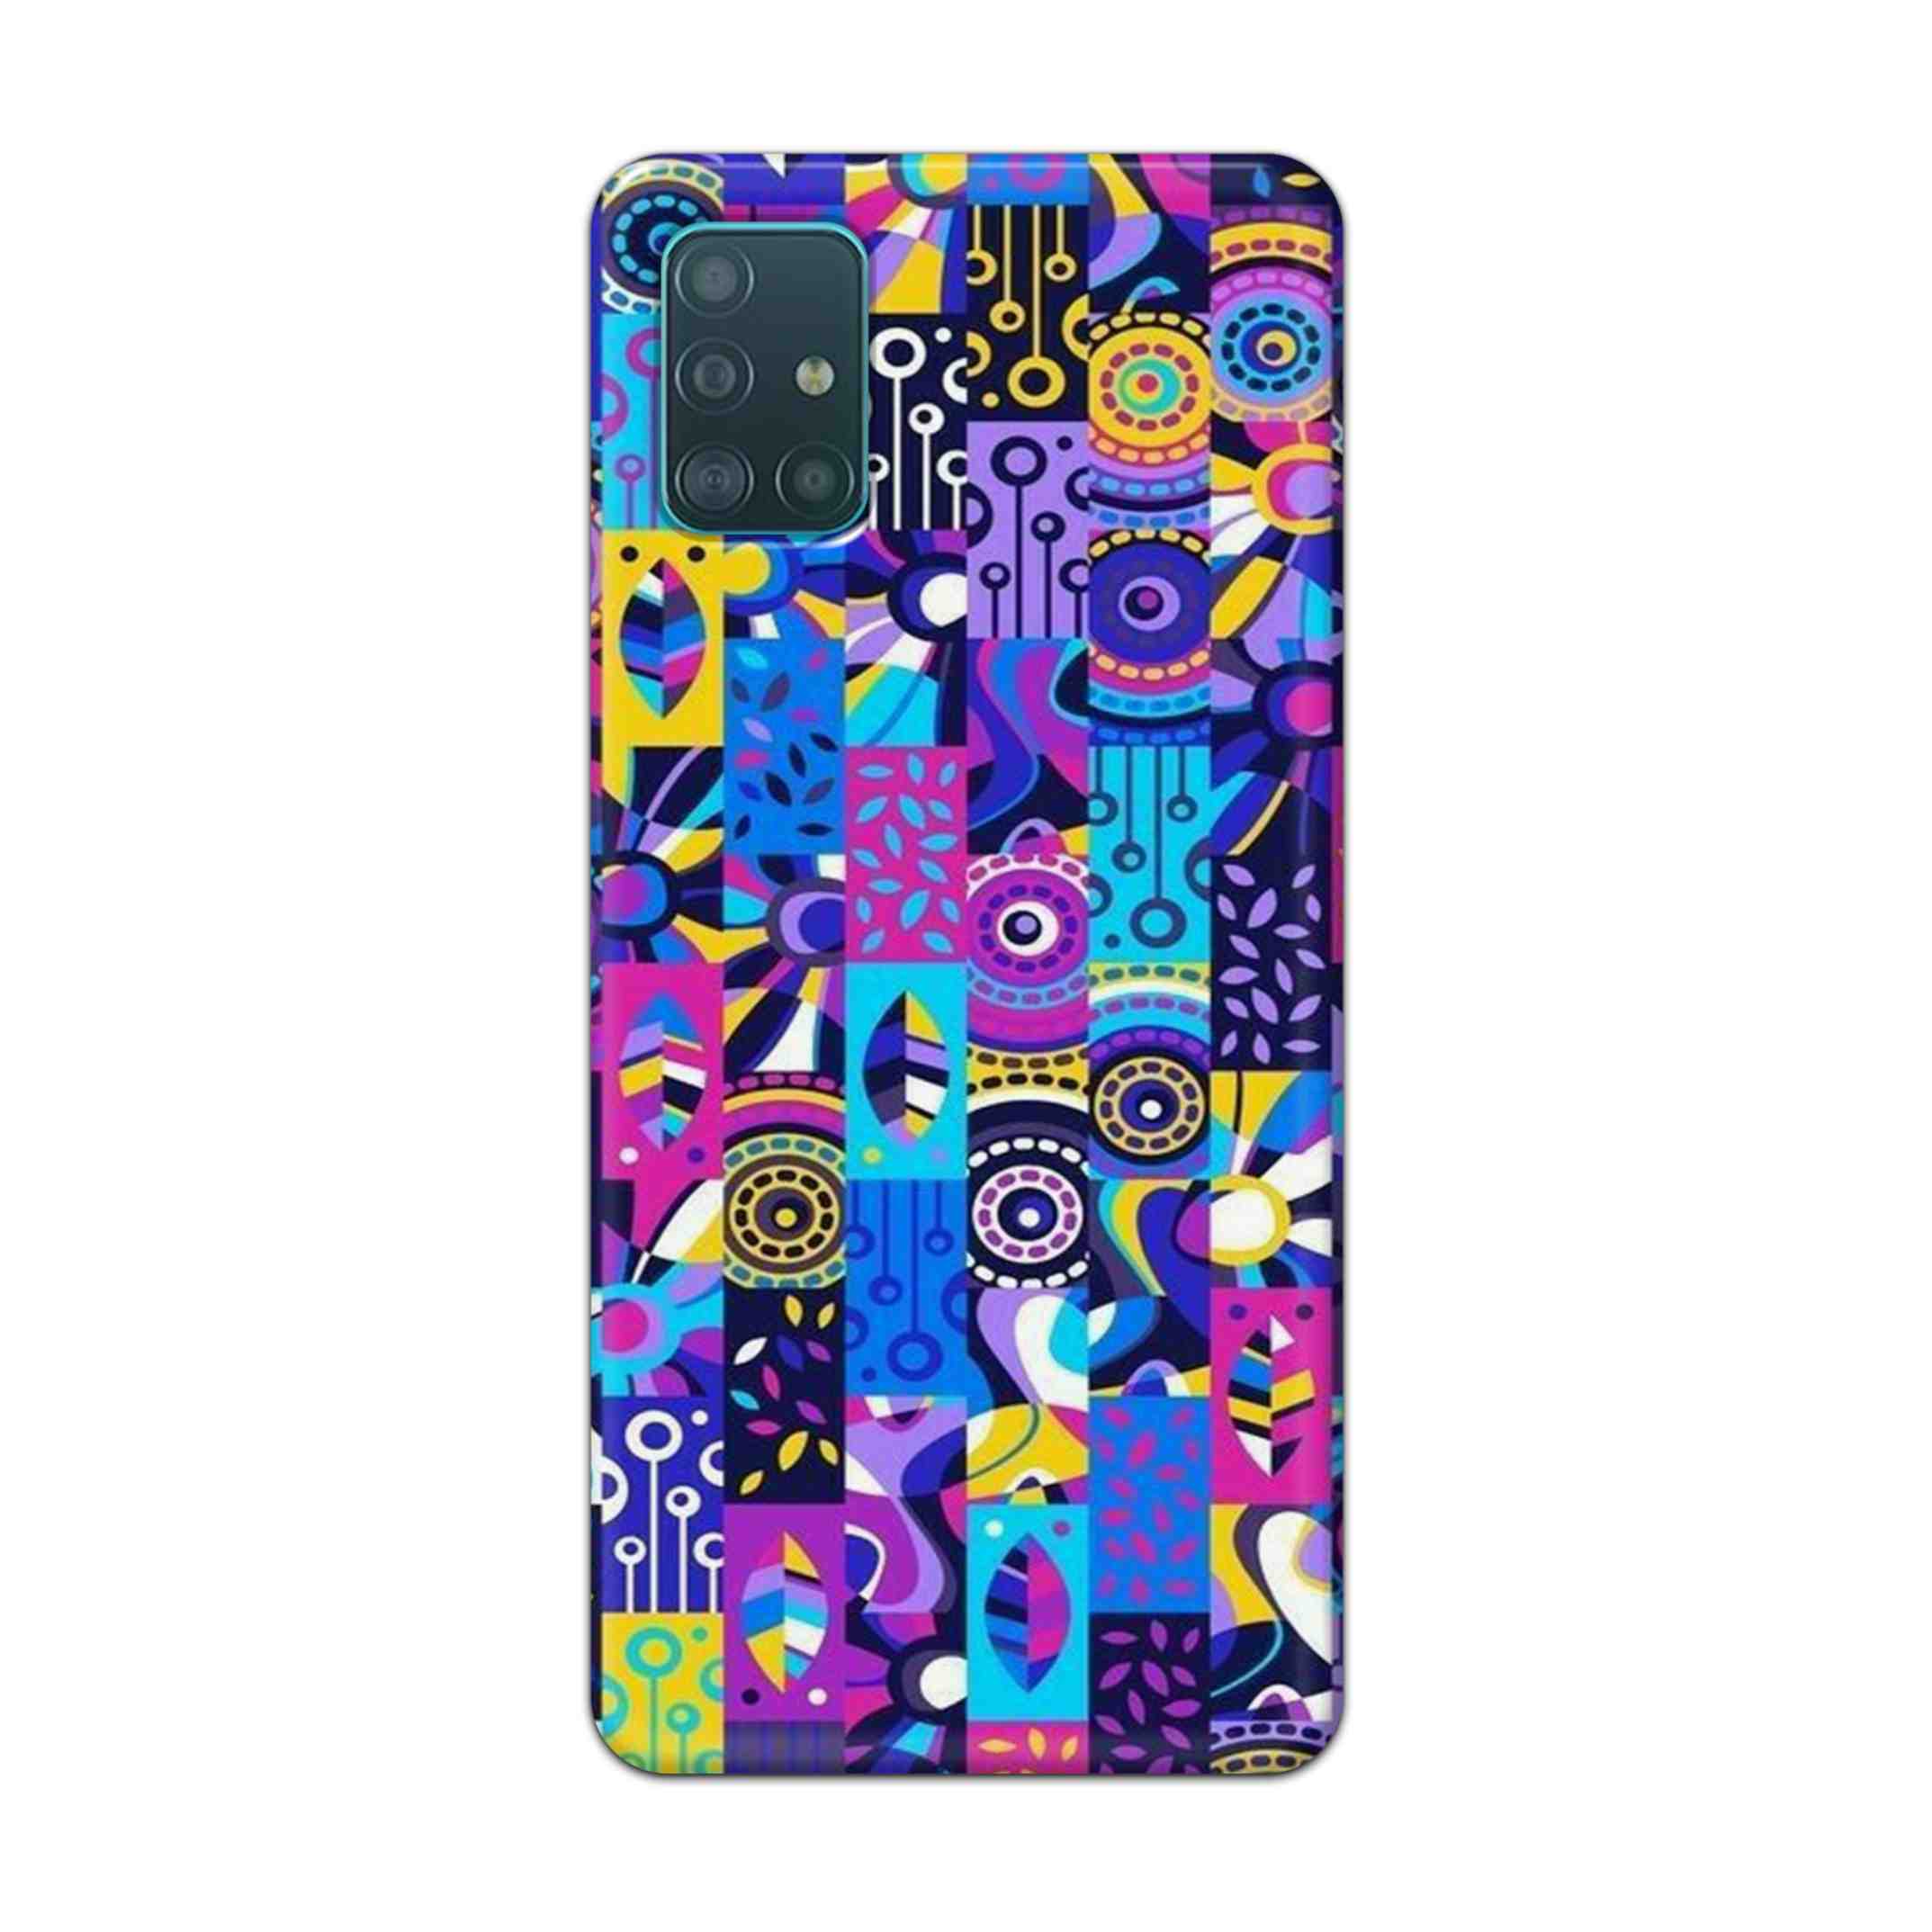 Buy Rainbow Art Hard Back Mobile Phone Case Cover For Samsung A51 Online